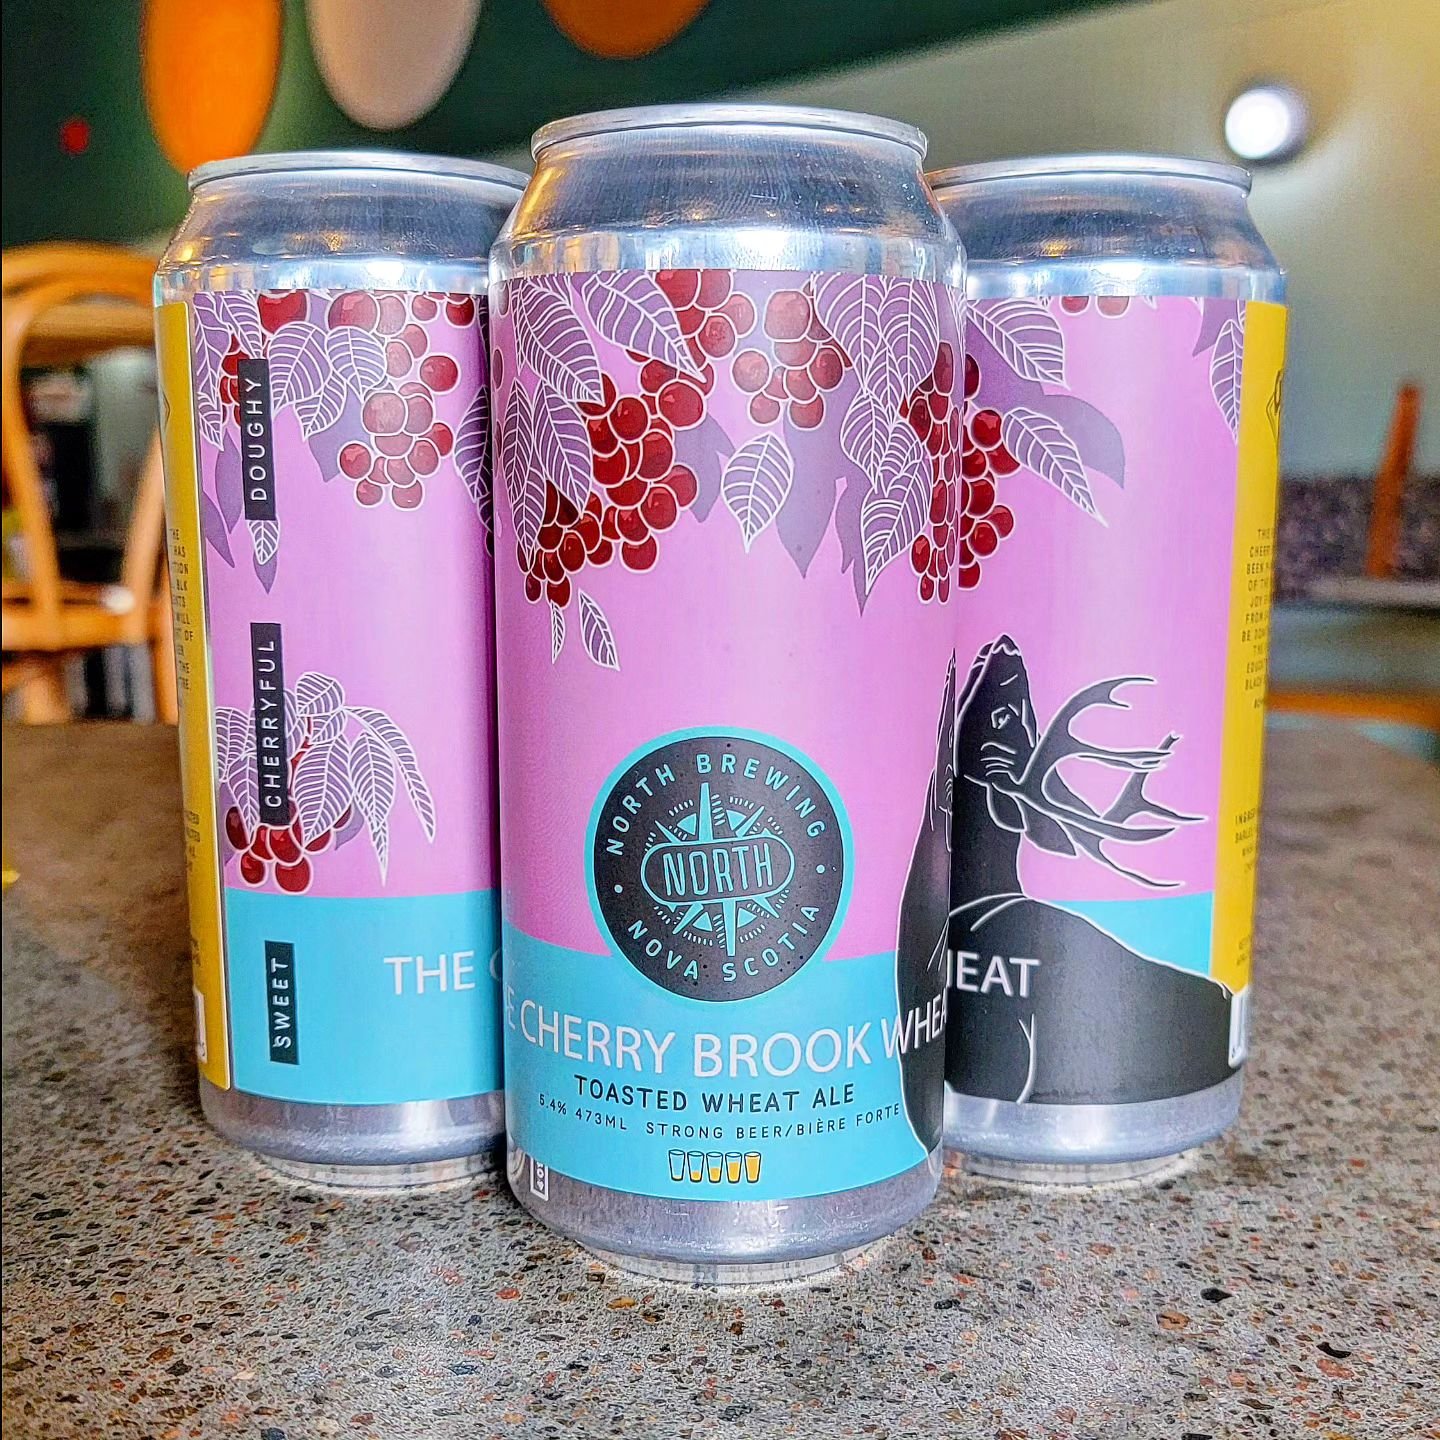 || CHERRY BROOK WHEAT IS BACK AND RAISING MONEY! ||

As part of the BLK JOY event we teamed up with our friends @changeisbrewingco and @leahafinlay to re-release Cherry Brook Wheat Ale! $0.50 from every can sold will be donated to the Pearleen Oliver